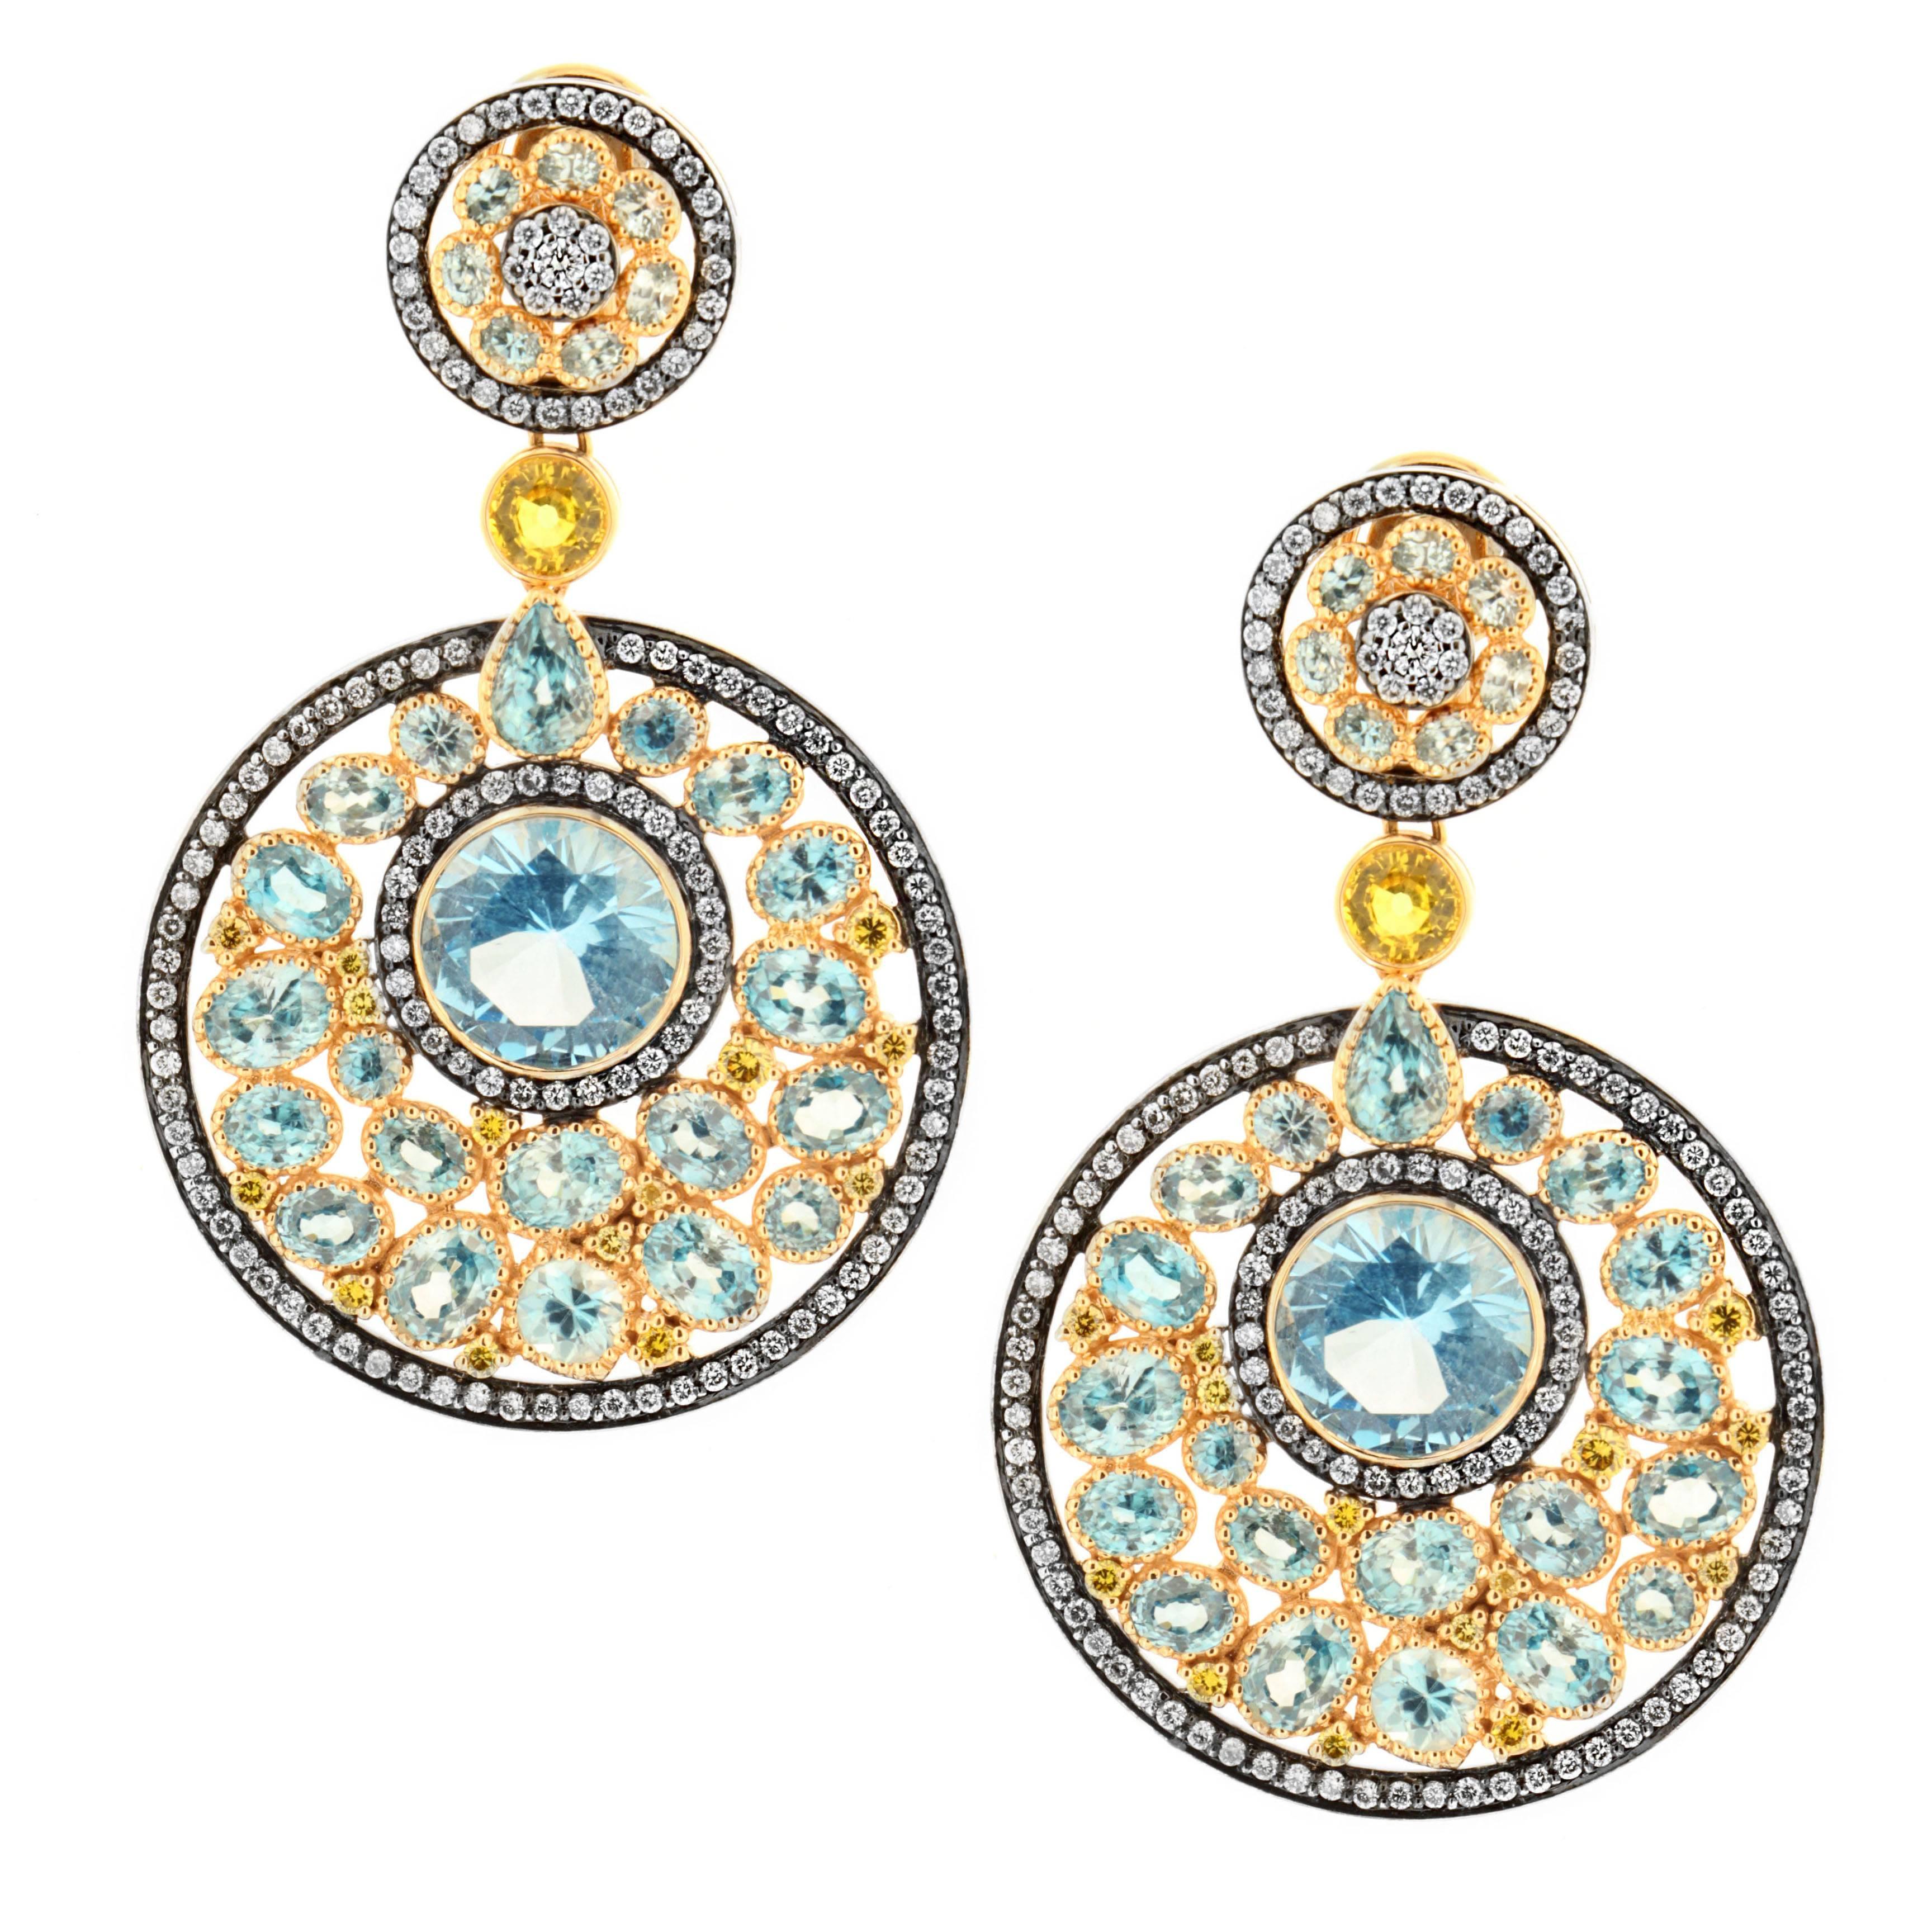 Zorab Creation Blue Zircon 25.00 and Blue Topaz 10.75 Dream Catcher  Earrings For Sale